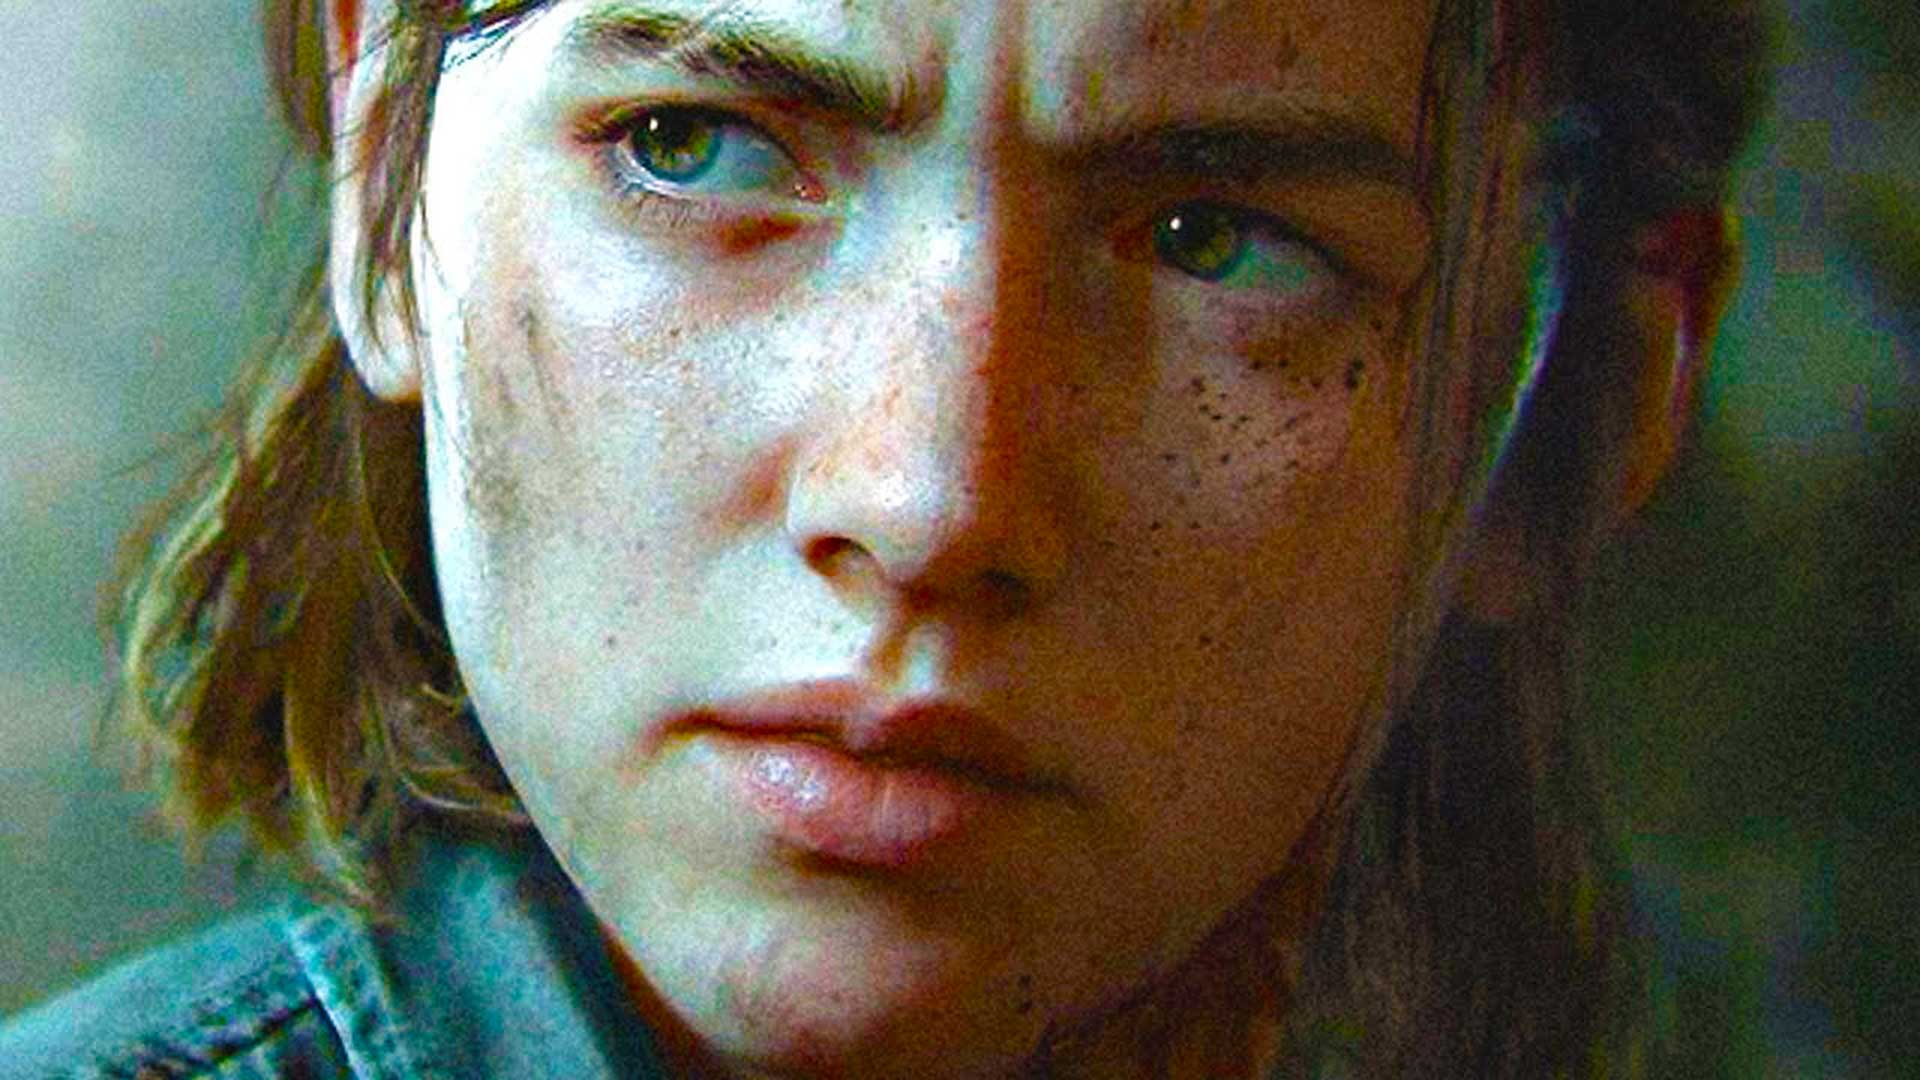 The Last of Us 3: Where Ellie's Story Could Go Next